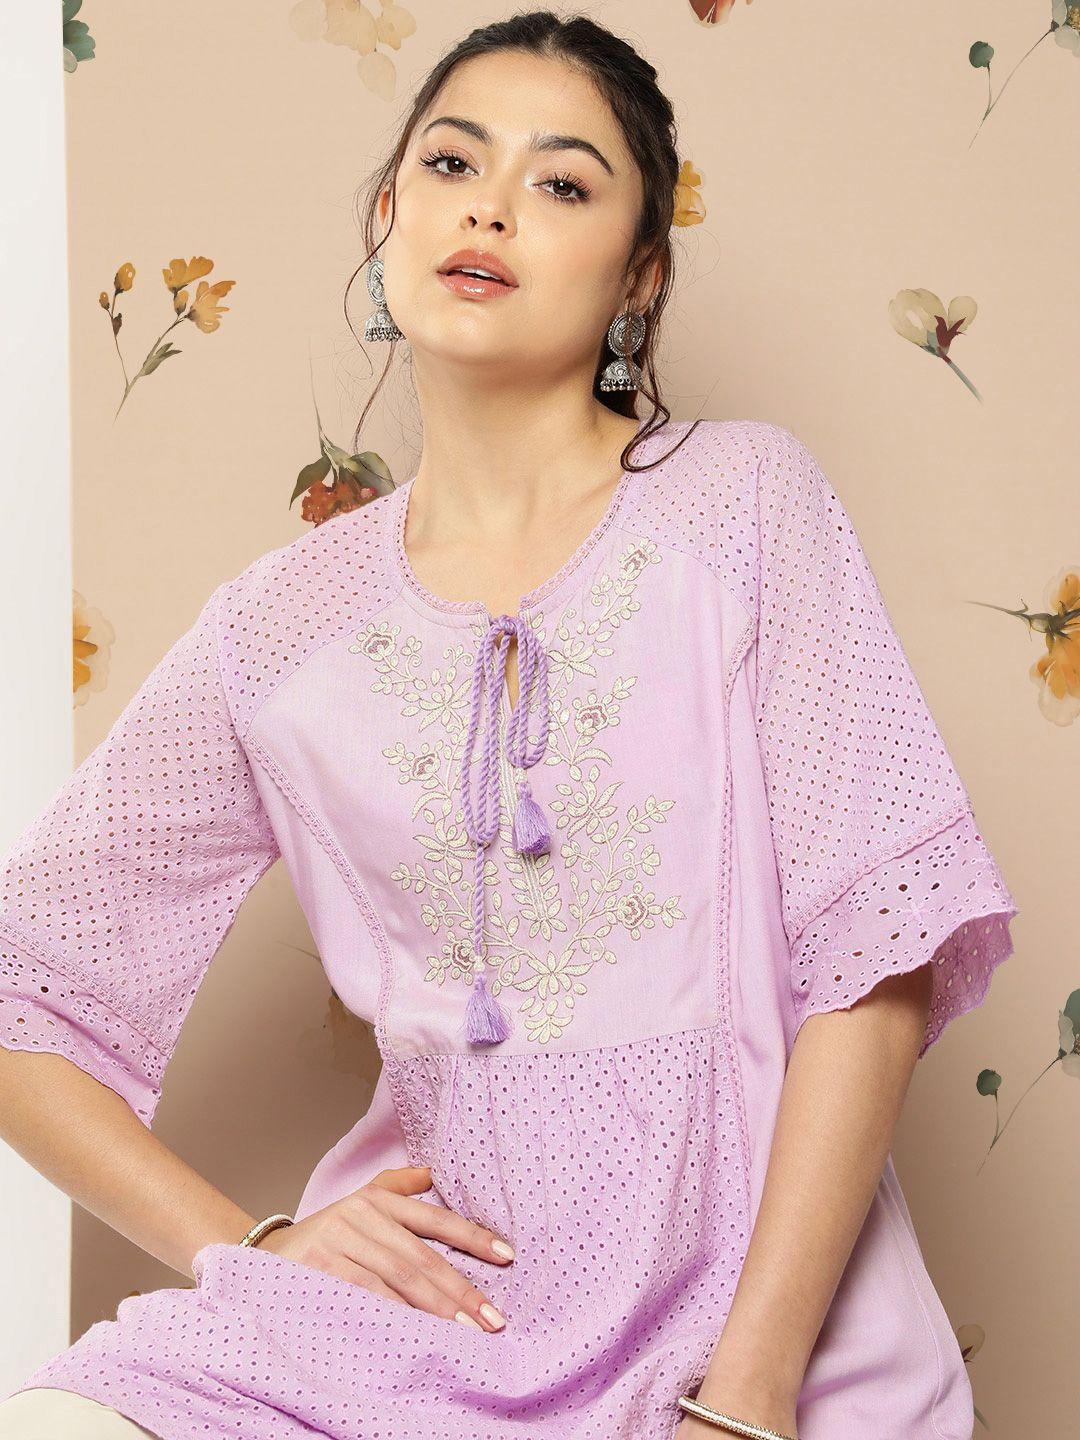 nayam by lakshita floral embroidered tie-up neck flared sleeves kurti